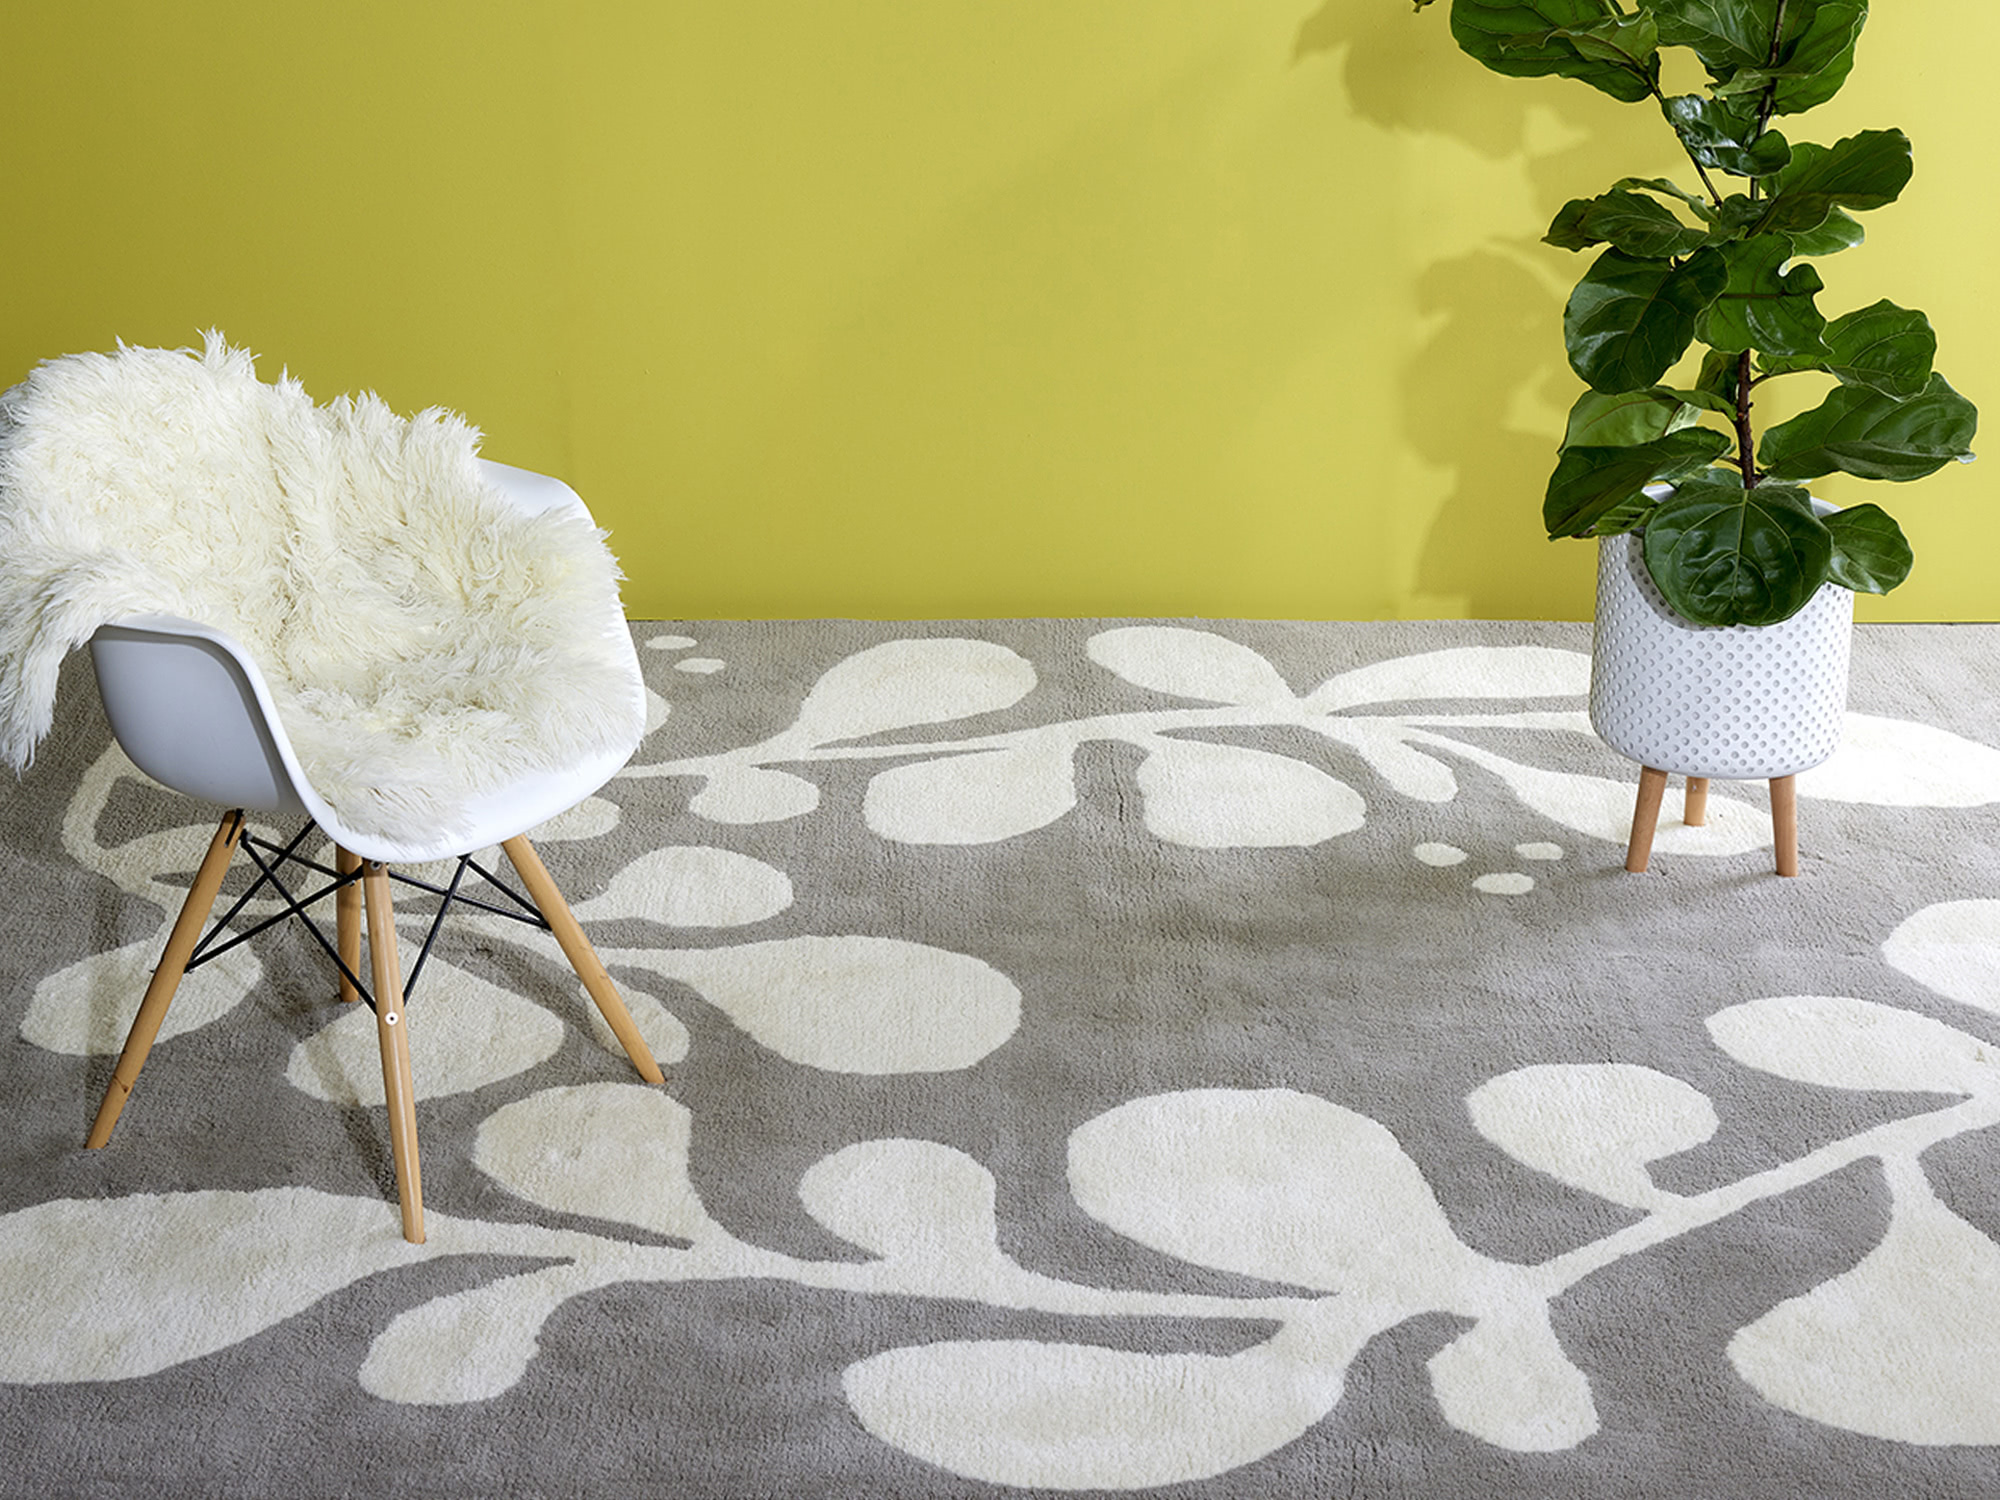 A gray and white vine patterned rug by angela adams